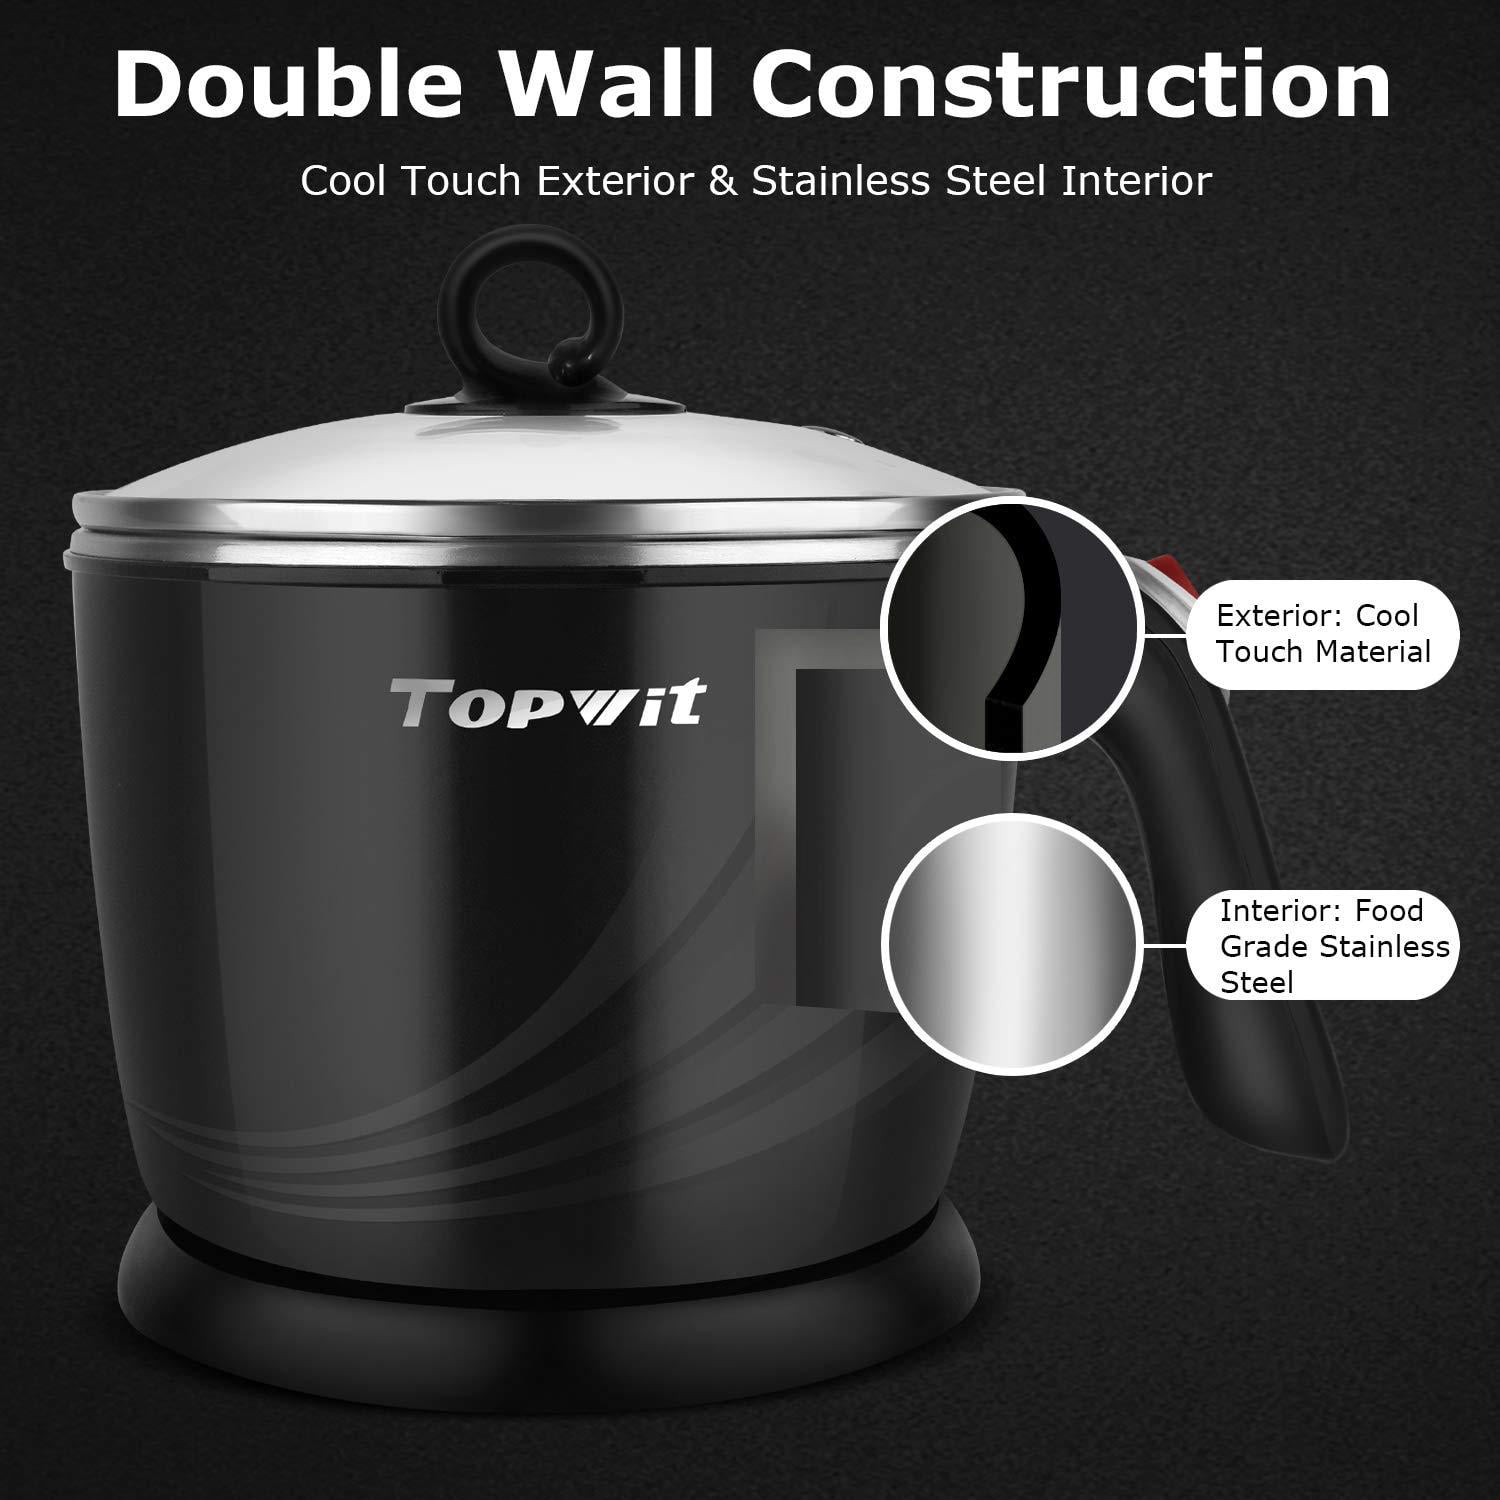 Topwit Electric Hot Pot Mini 1.2 Liter Electric Cooker Review